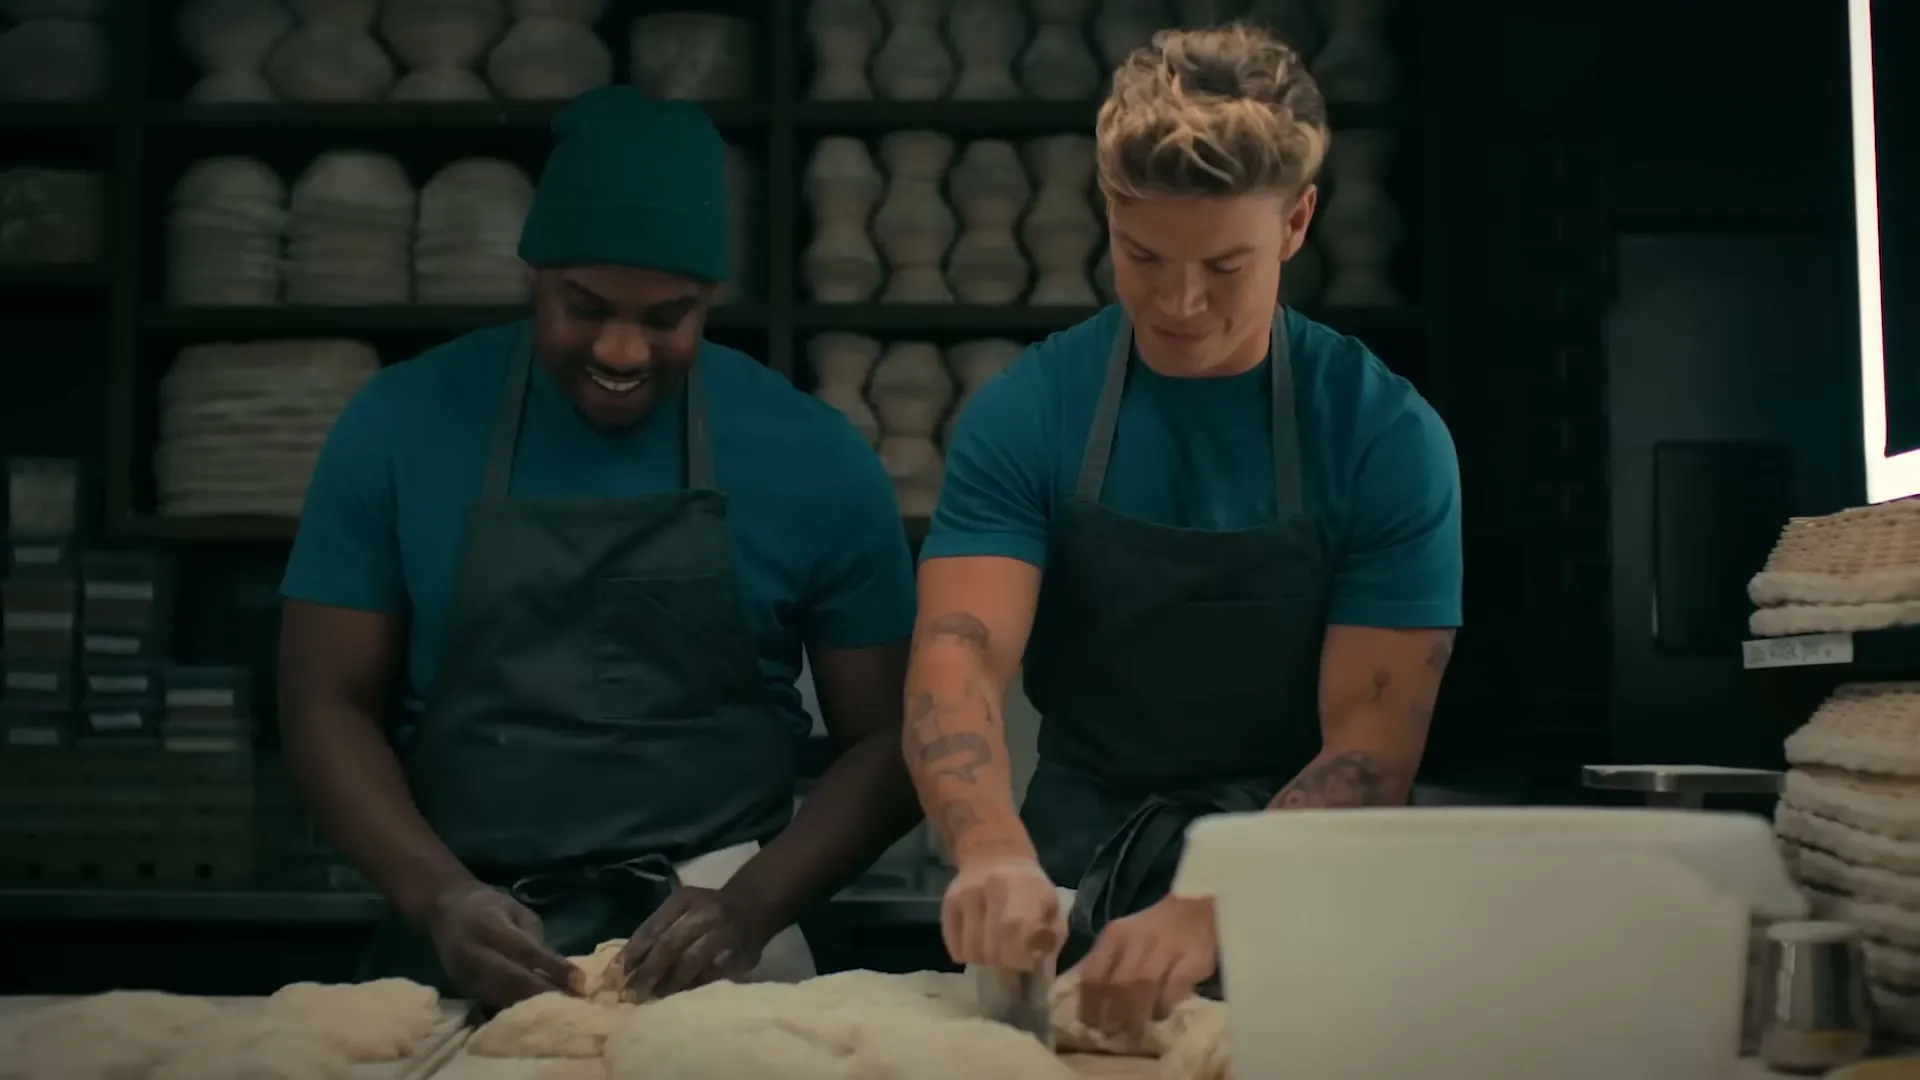 Marcus and Luca in The Bear Season 2, making pastries.